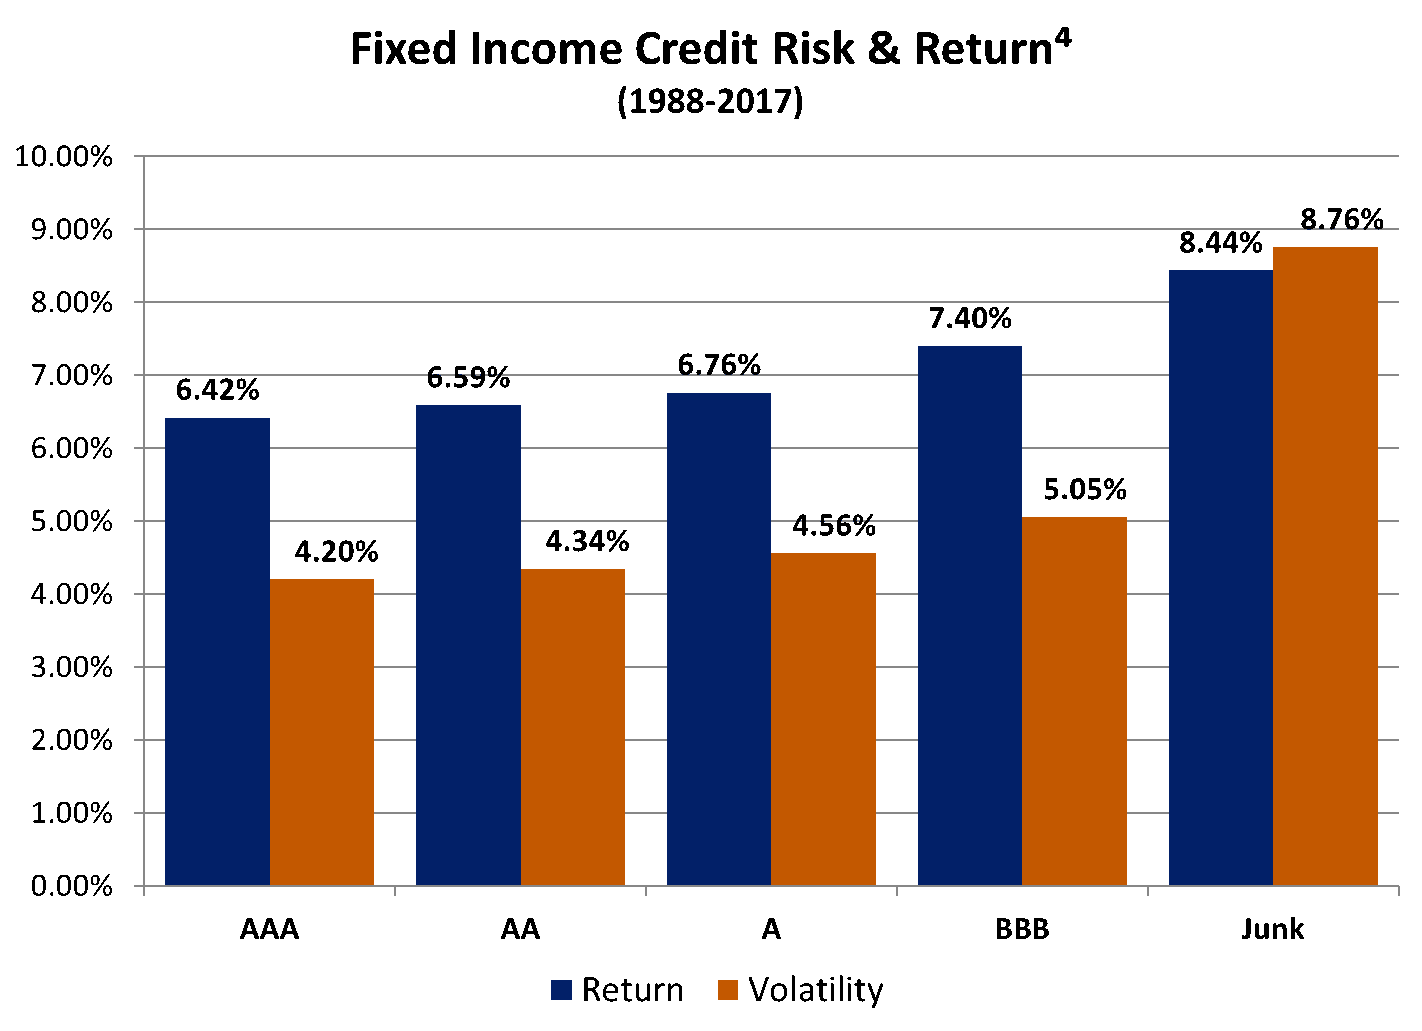 Fixed Income Credit Risk and Return